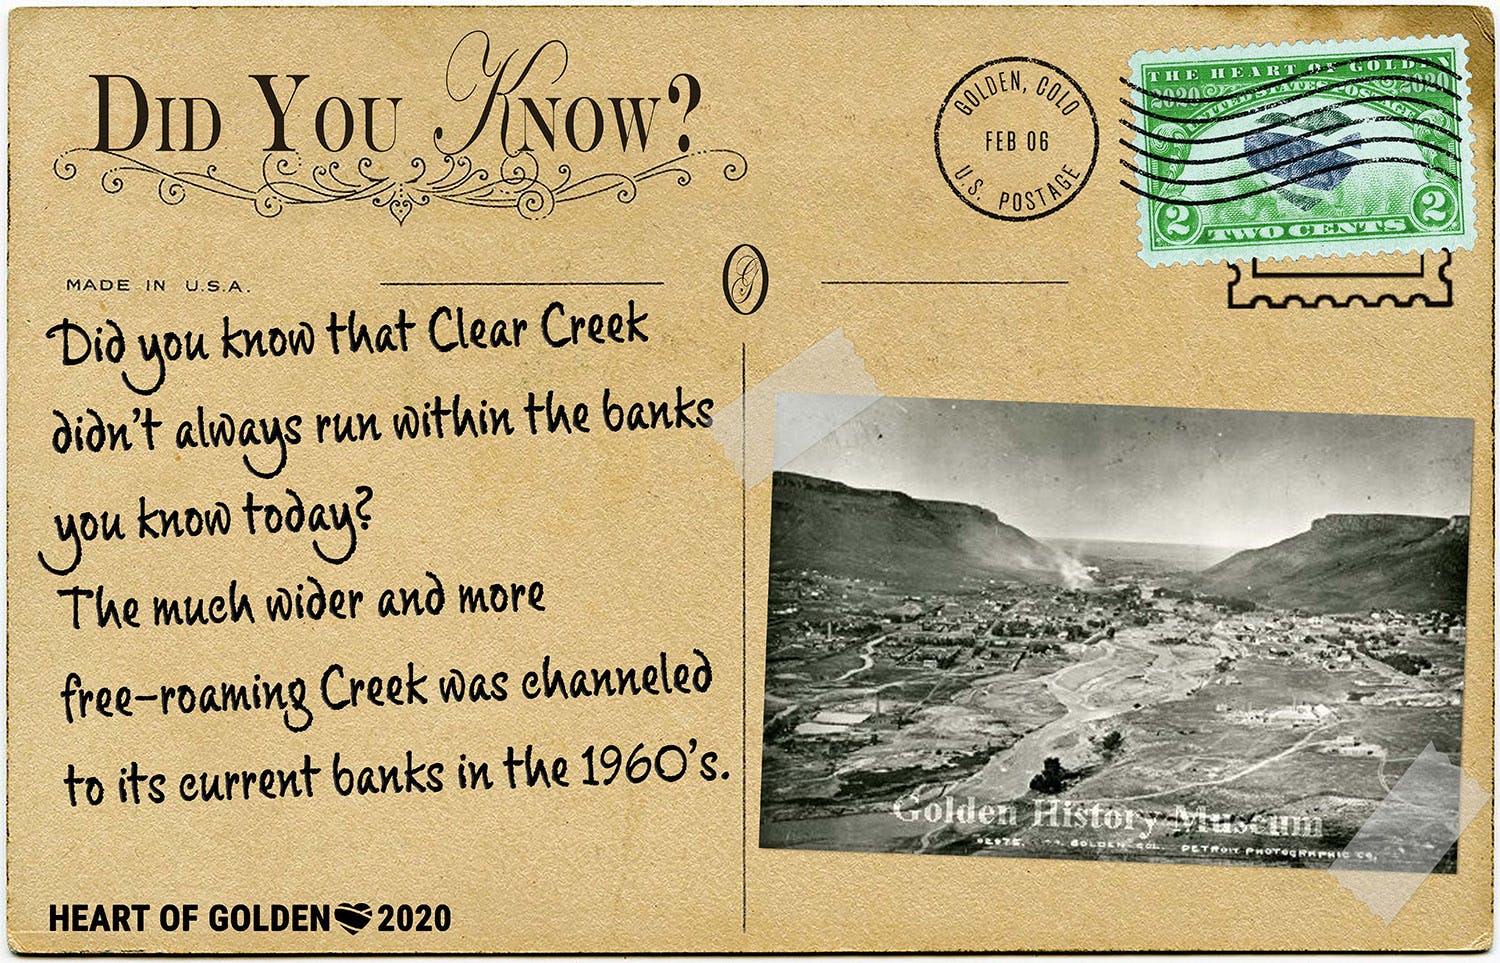 Clear Creek, once wider and free-roaming, was channeled to its current banks in the 1960's.